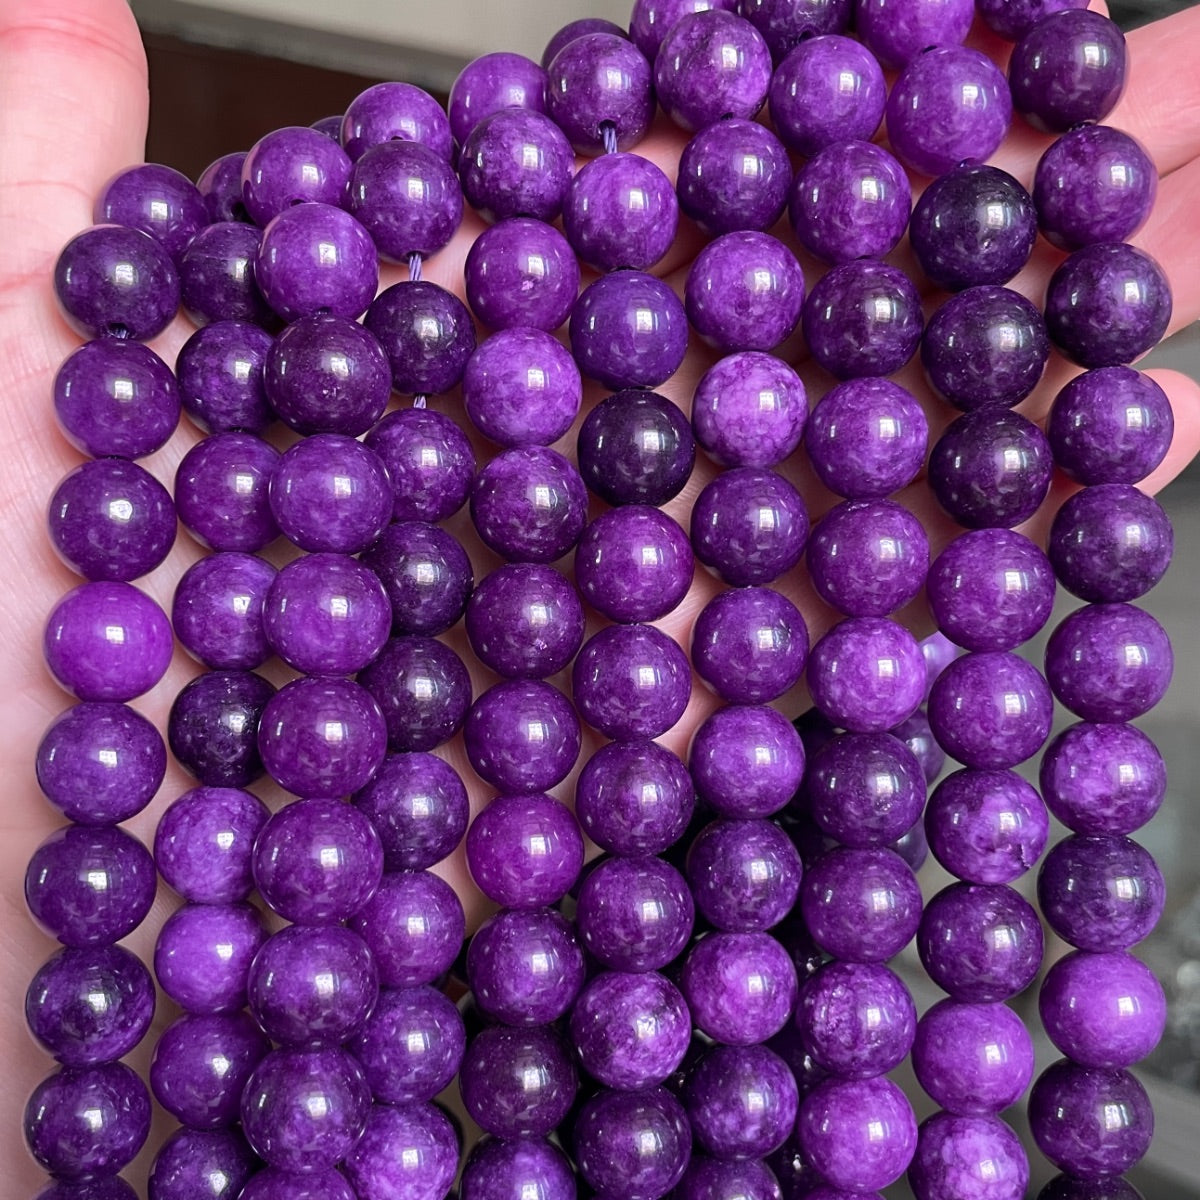 2 Strands/lot 10/12mm Purple Chalcedony Jade Round Stone Beads Stone Beads 12mm Stone Beads Mardi Gras New Beads Arrivals Other Stone Beads Charms Beads Beyond